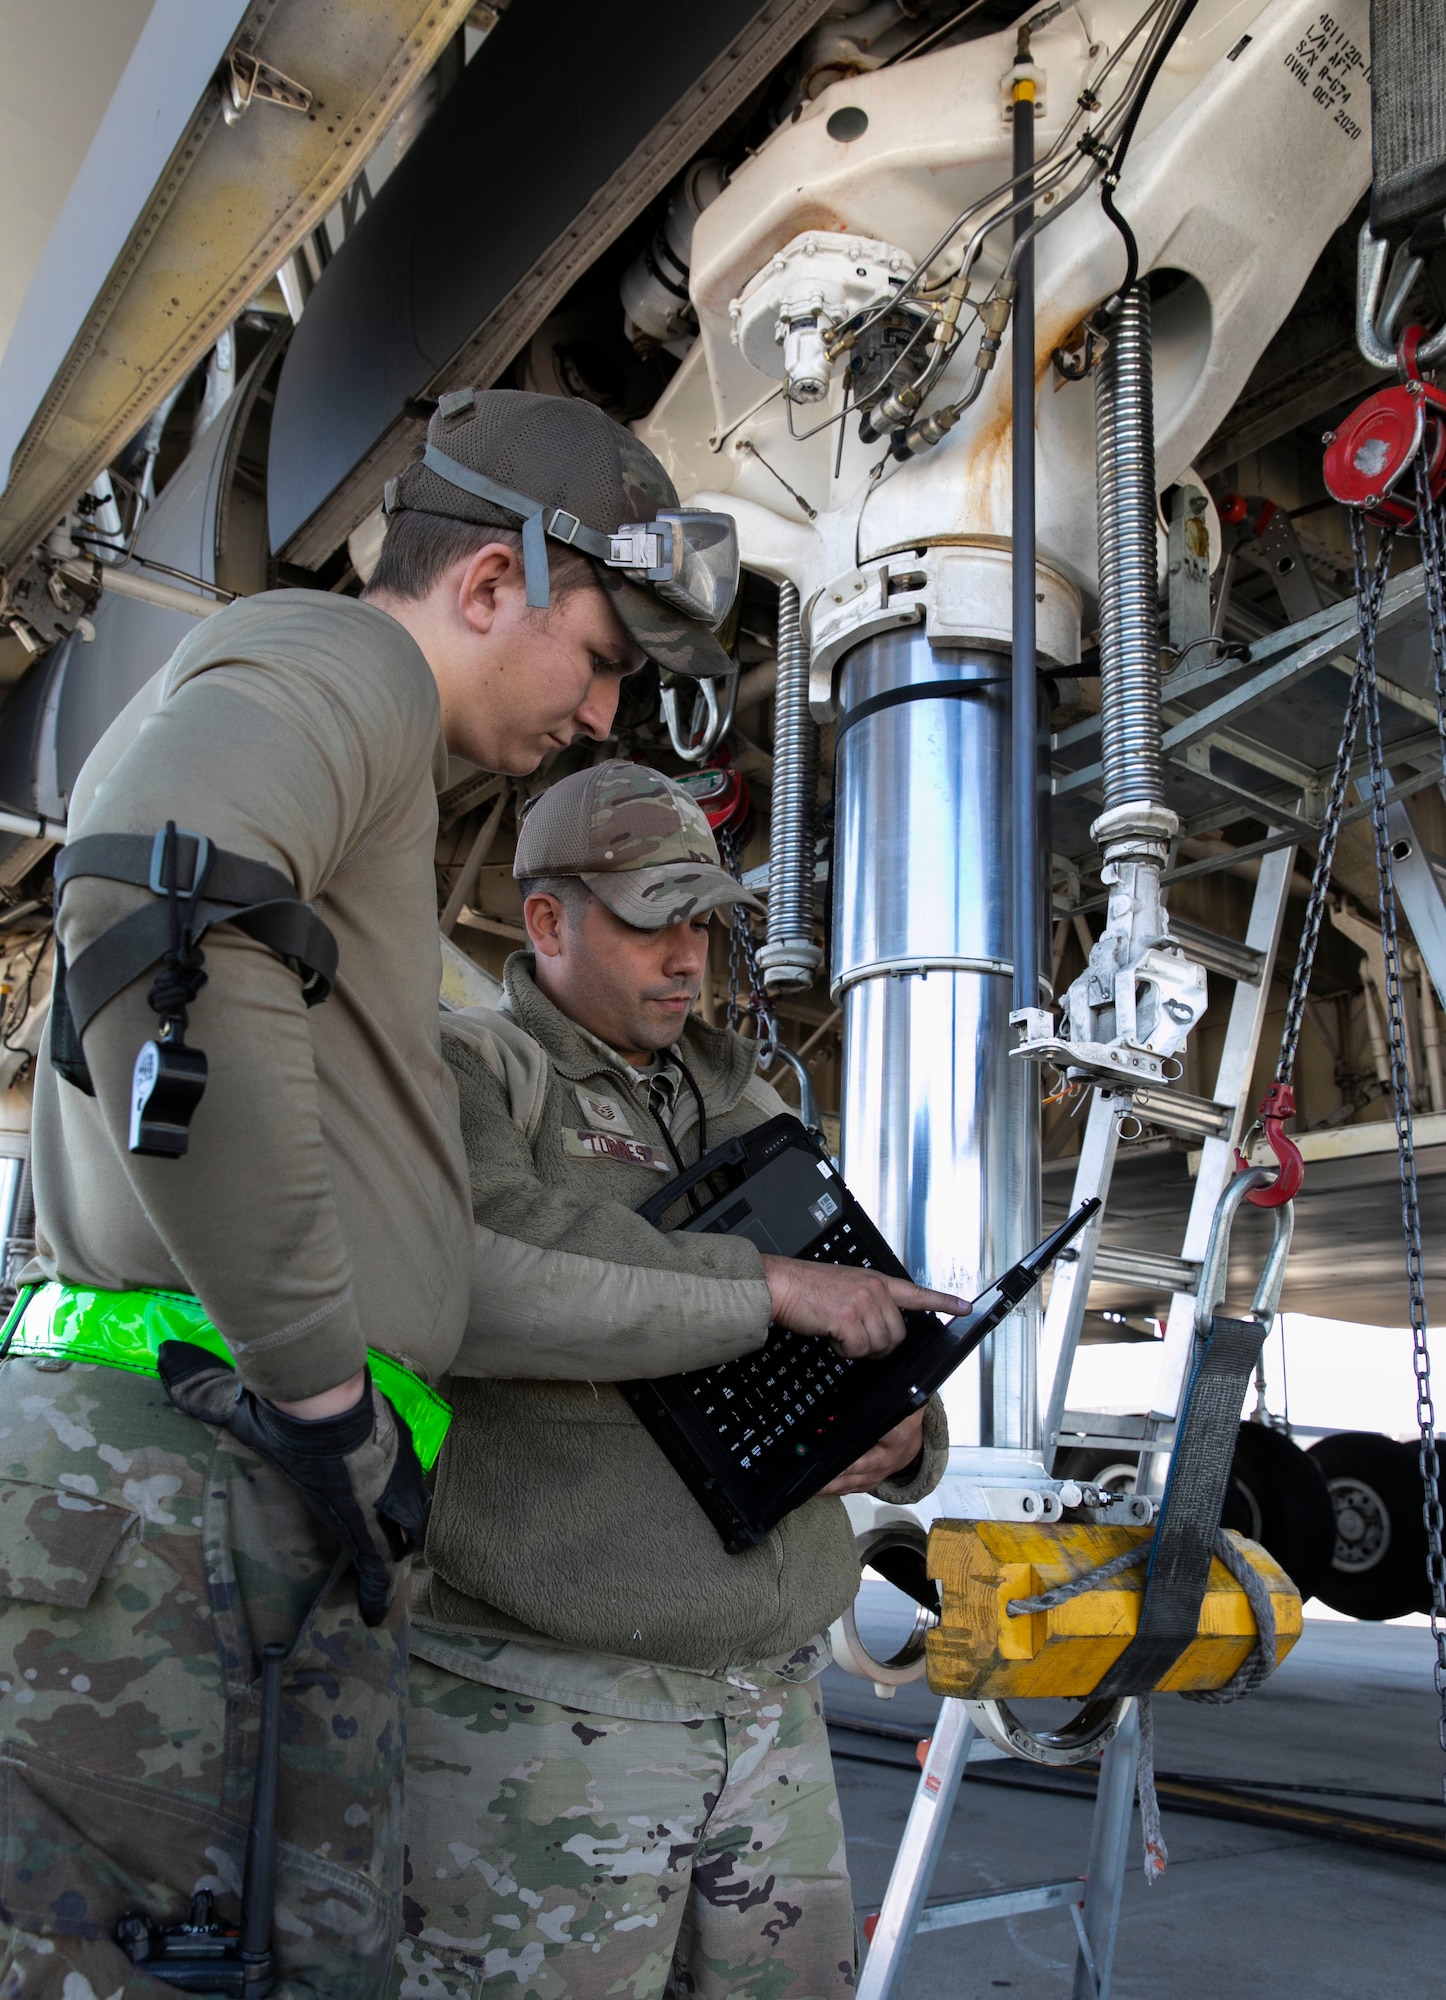 Senior Airman Andrew Small, left, 436th Aircraft Maintenance Squadron hydraulic systems journeyman, and Tech. Sgt. Victor Torres, 436th AMXS hydraulic systems craftsman, review technical orders during a C-5M Super Galaxy main landing gear strut repack at Dover Air Force Base, Delaware, Oct. 6, 2022. Small, Torres and other hydraulic system maintainers removed and replaced internal seals during the repack procedure. (U.S. Air Force photo by Roland Balik)